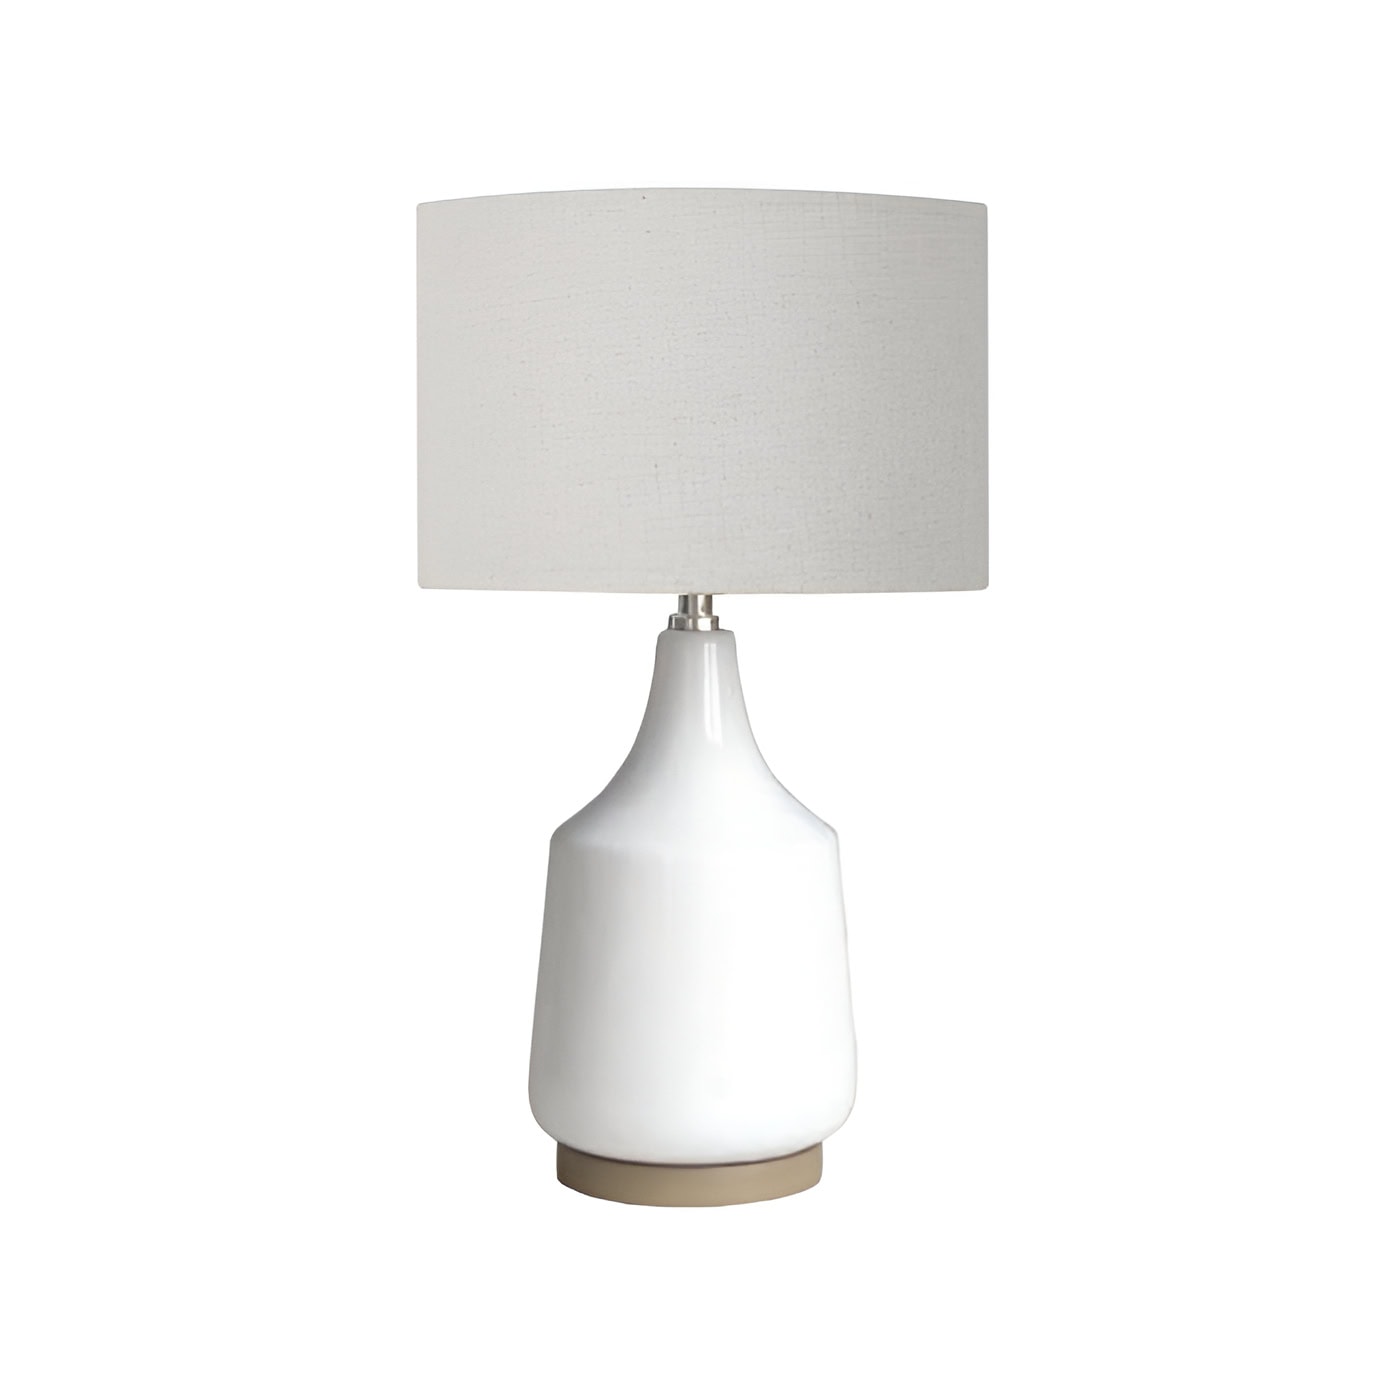 Torquay White Ceramic Table Lamp with White Shade